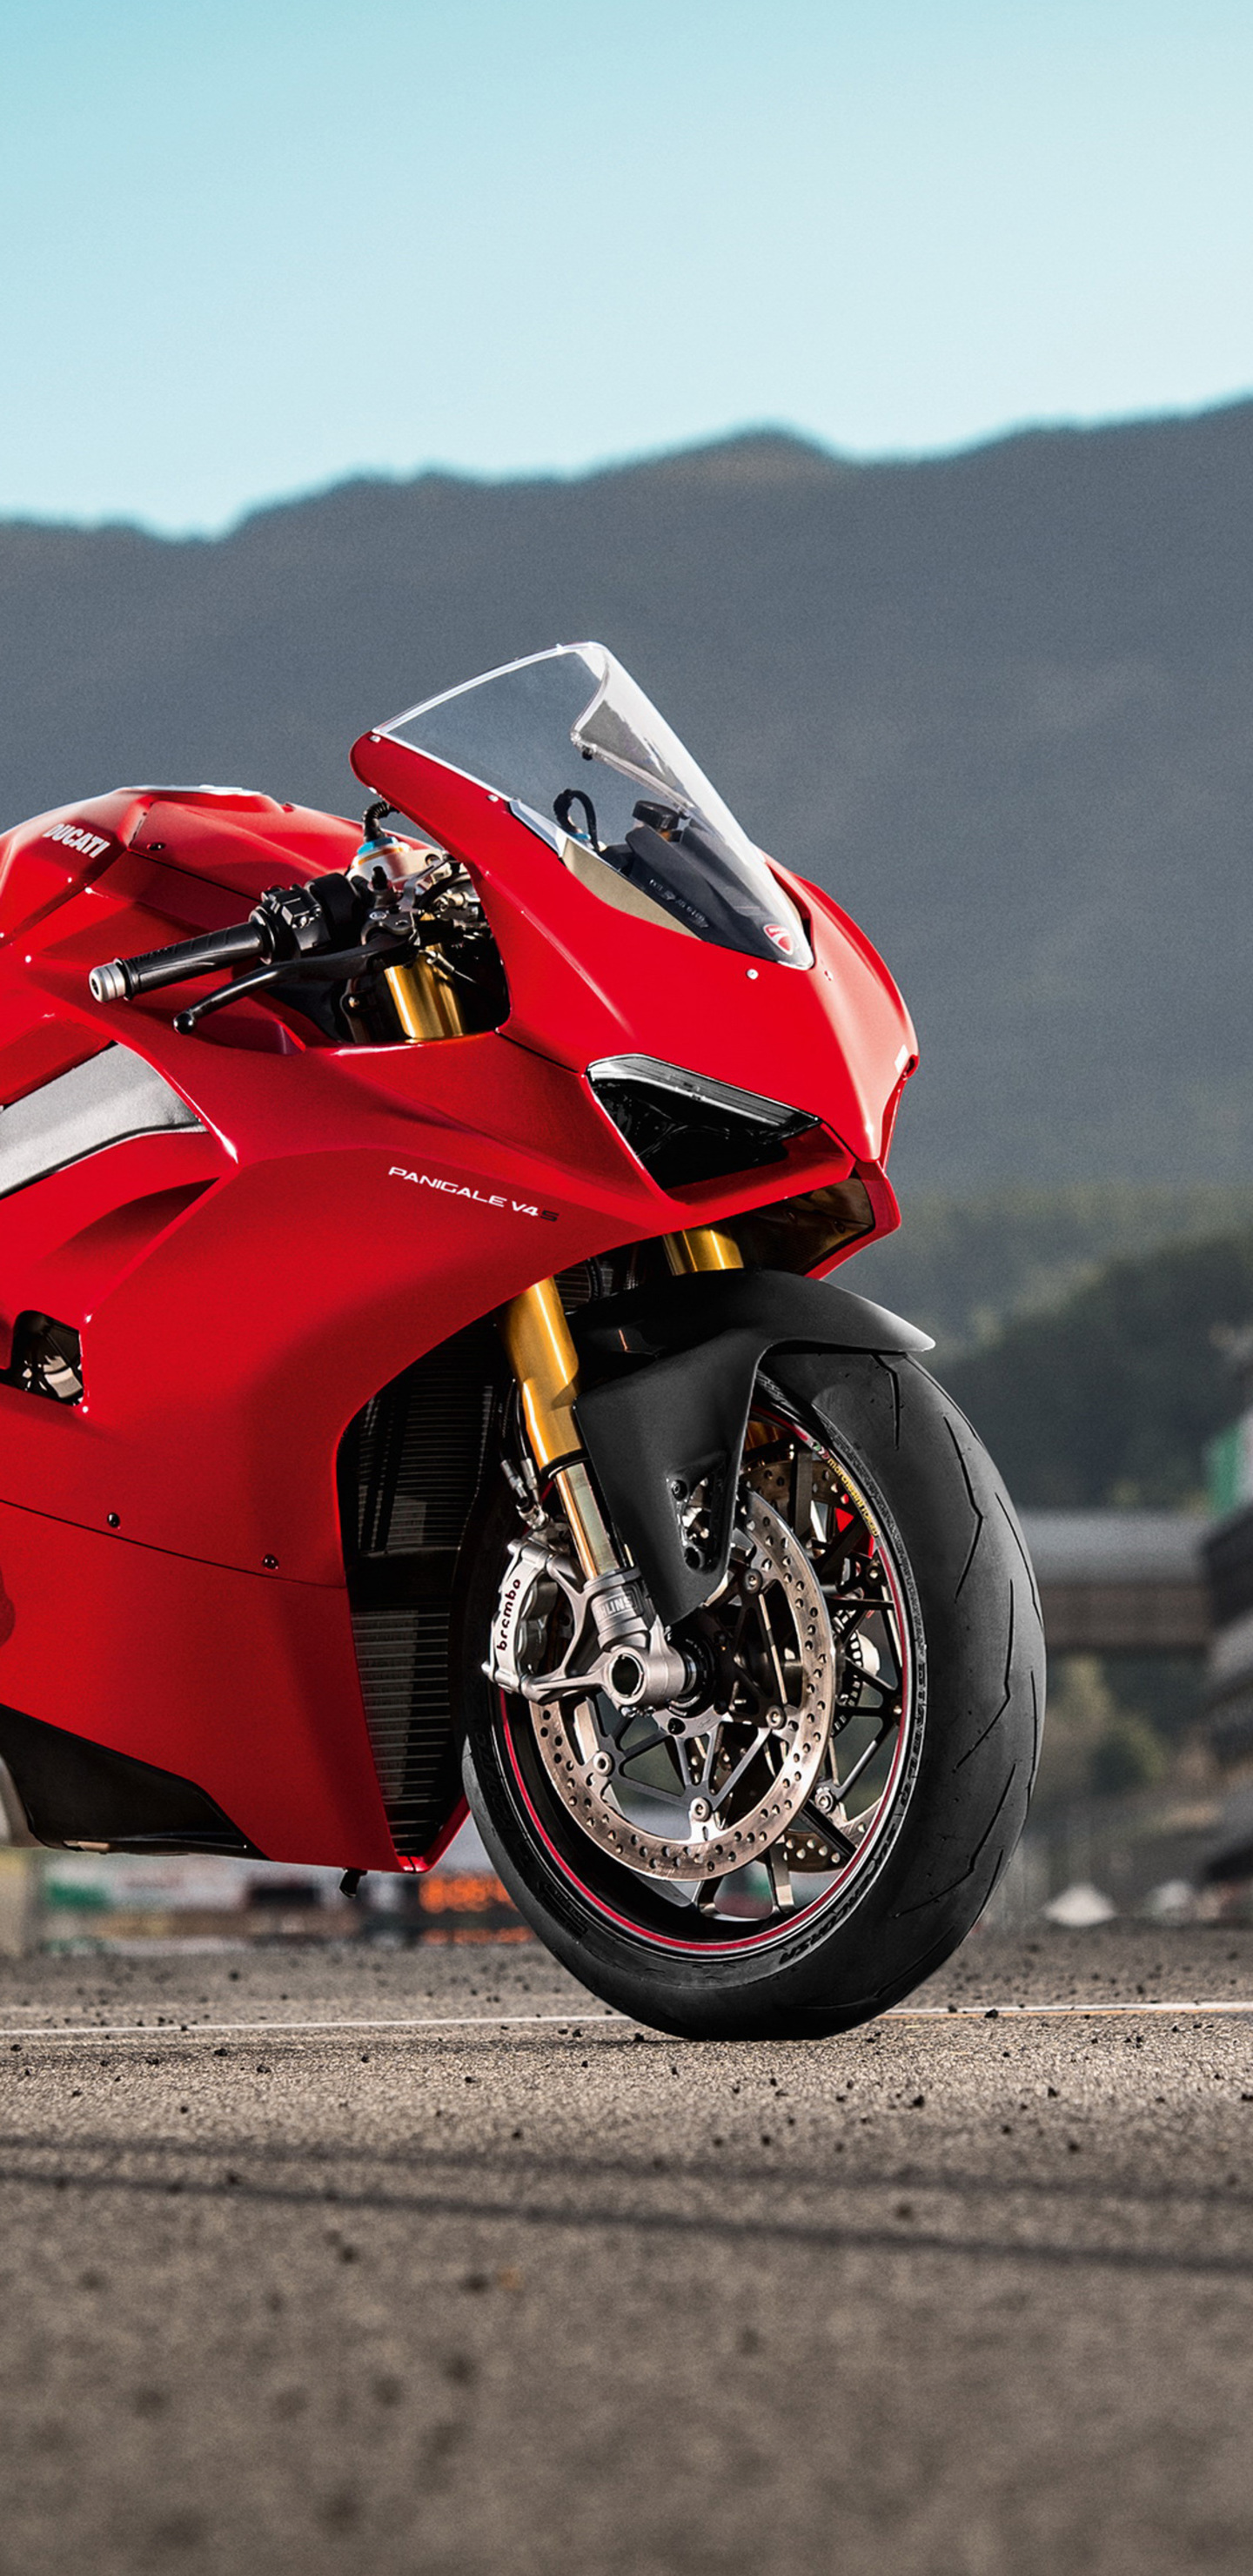 Ducati Panigale V4 S 2018 4k Samsung Galaxy S8 S8 Note , HD Wallpaper & Backgrounds